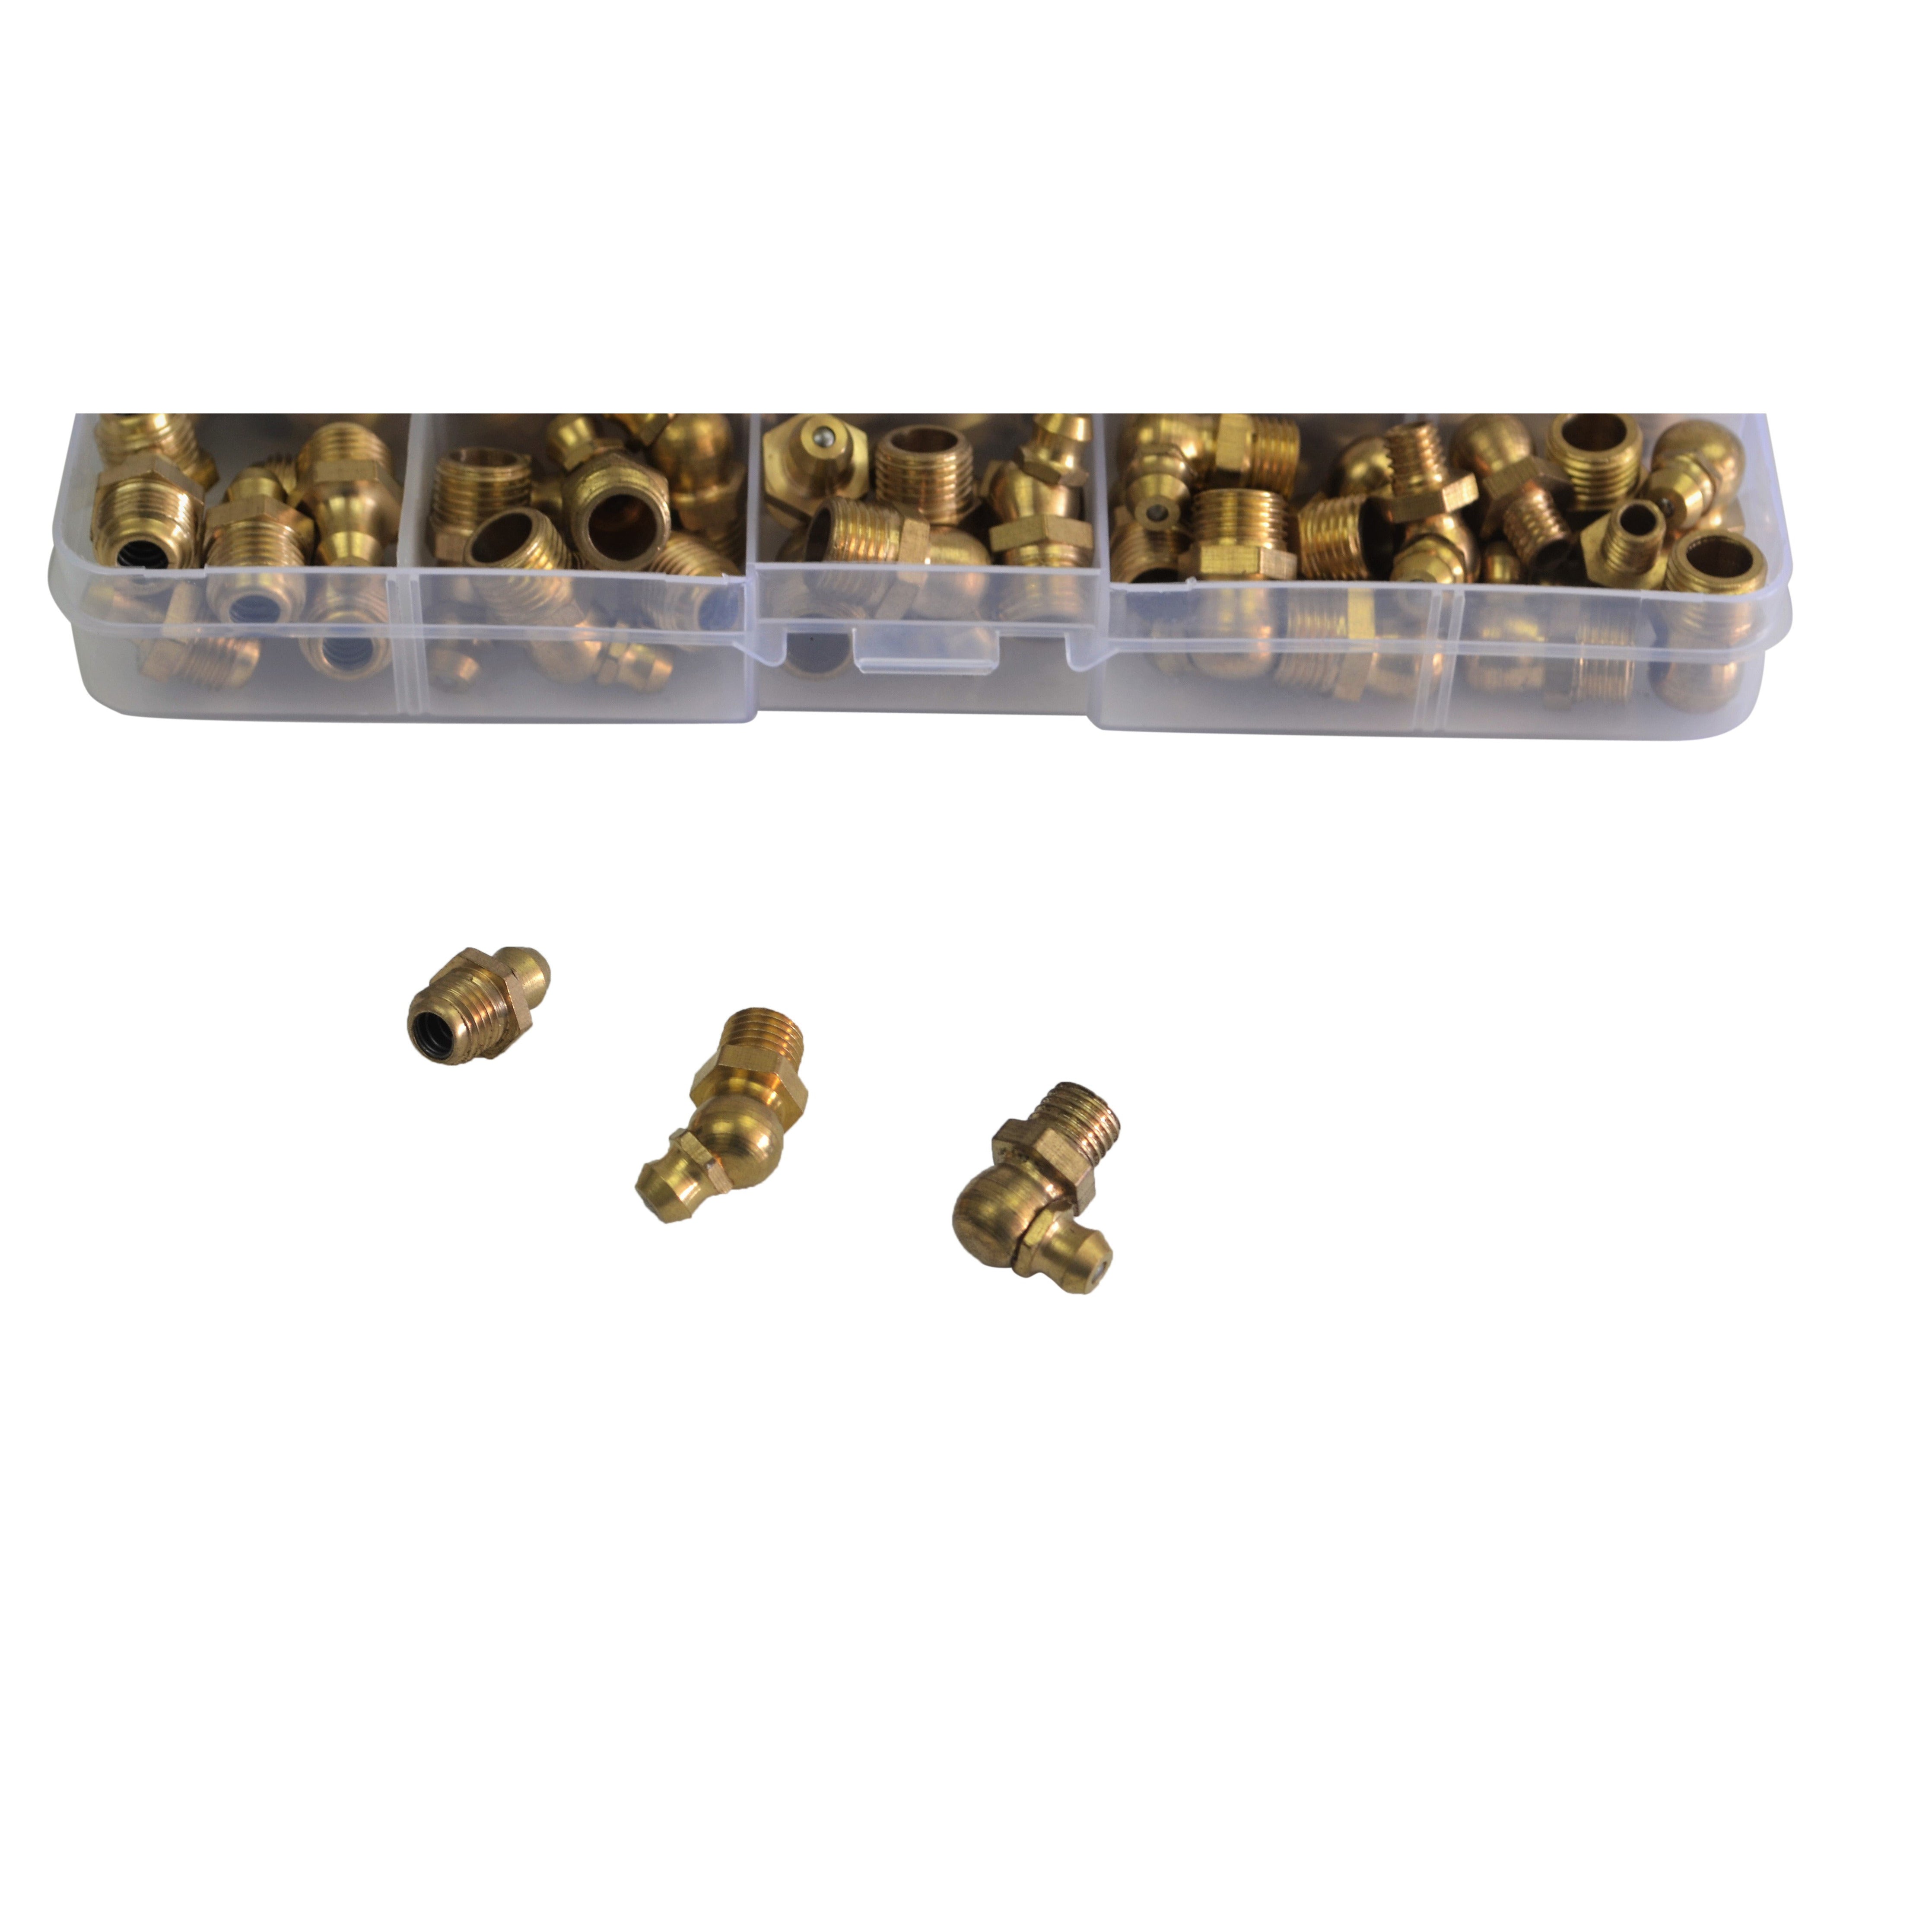 brass metric grease nipple grab kit assortment 135 piece set workshop supplies hand tools fastners and hardware 